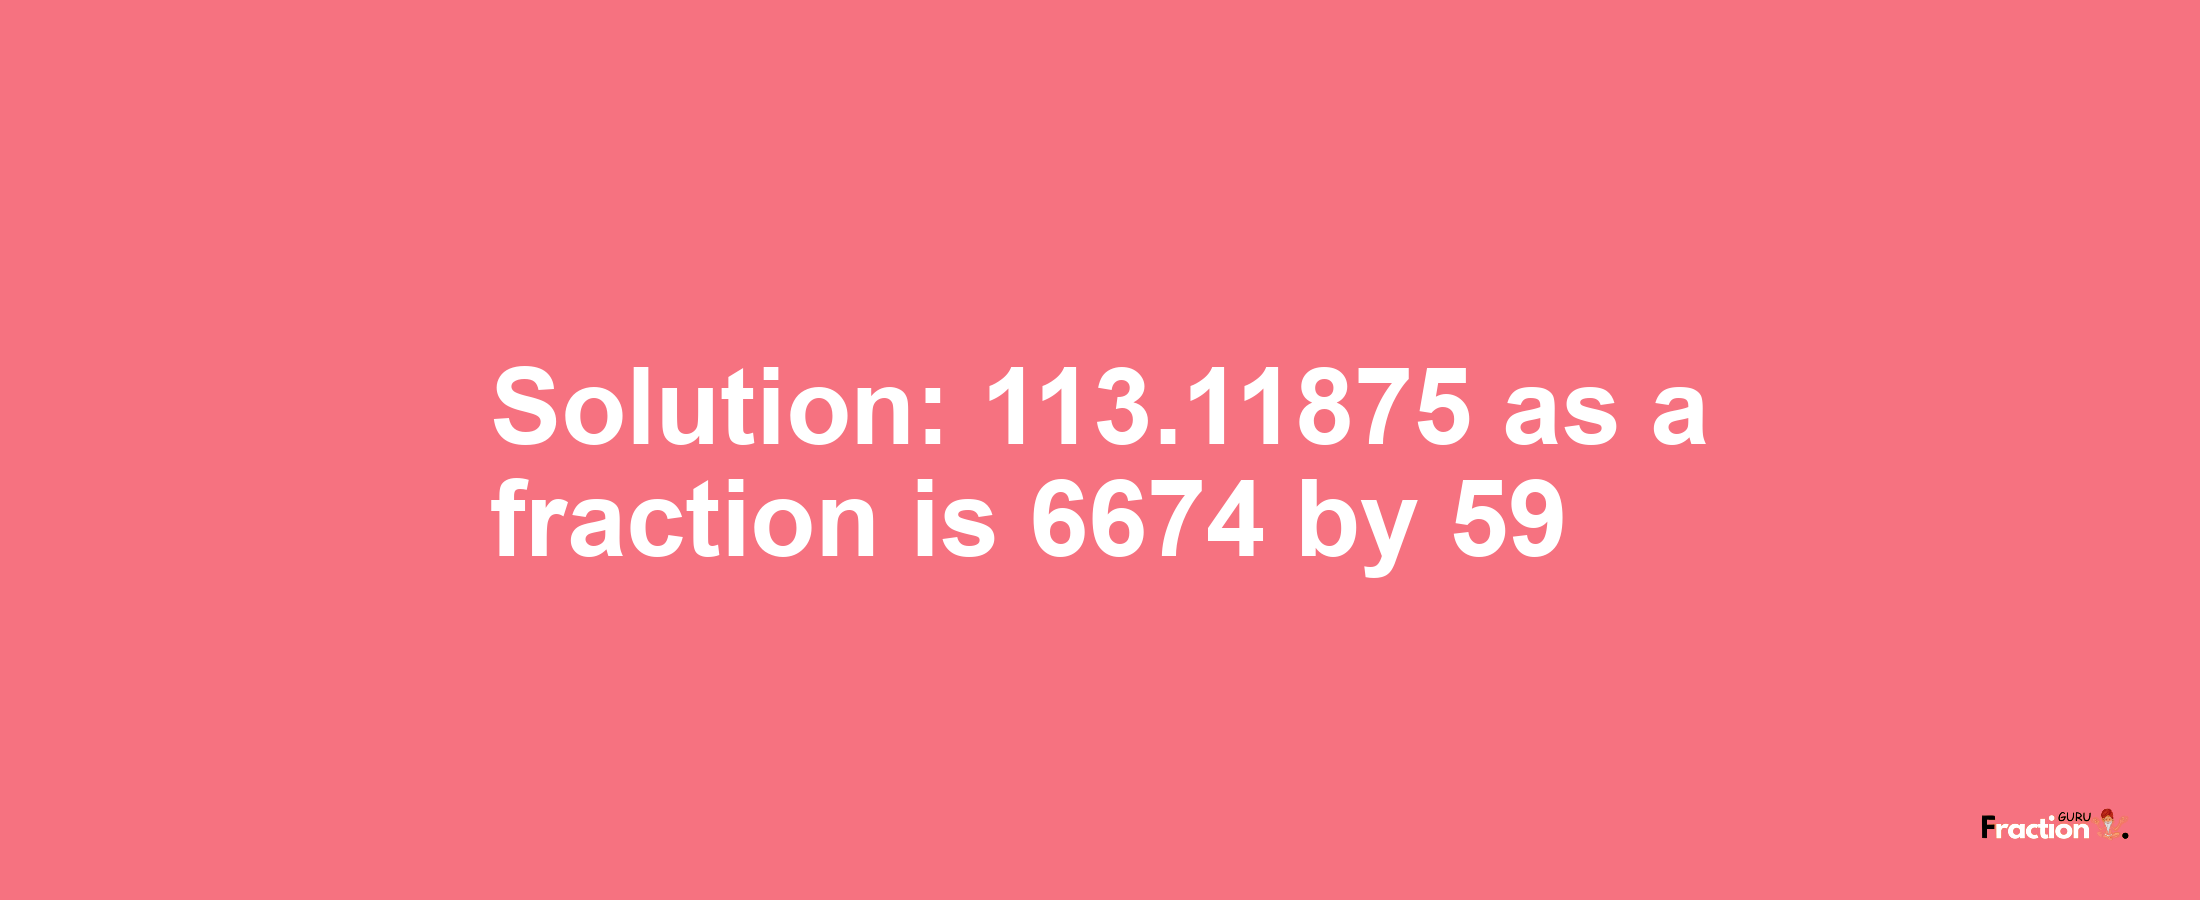 Solution:113.11875 as a fraction is 6674/59